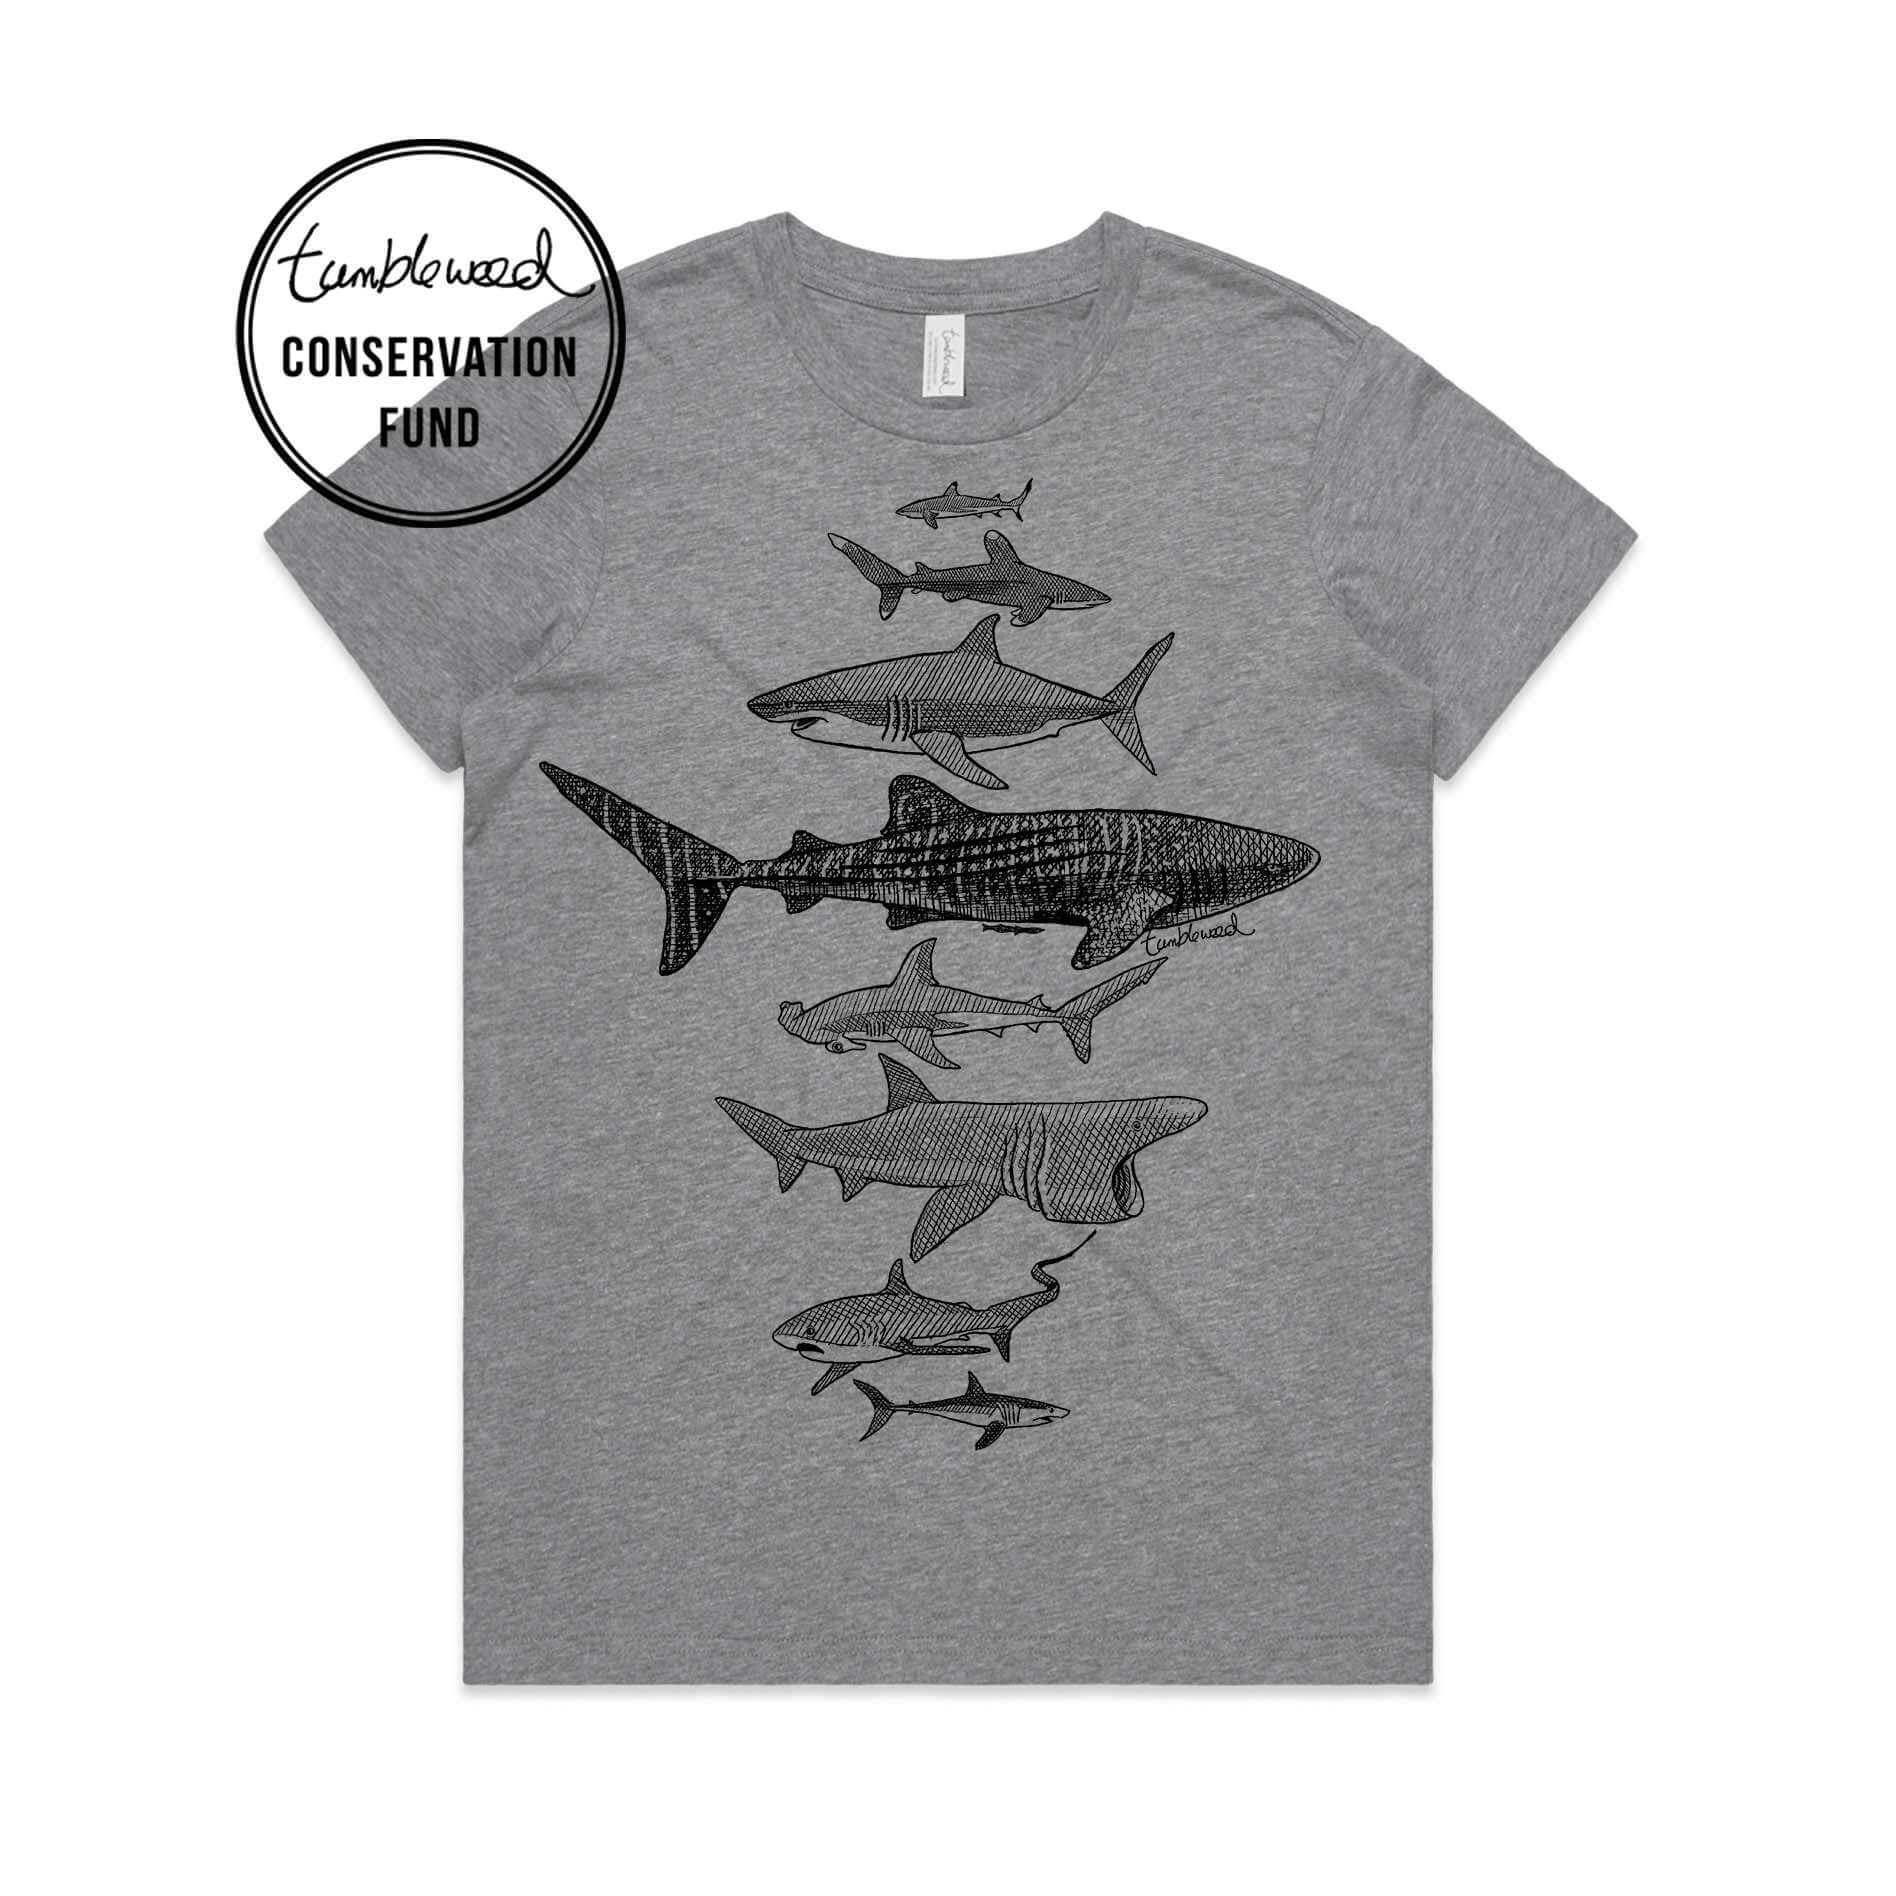 Grey marle, female t-shirt featuring a screen printed Sharks design.